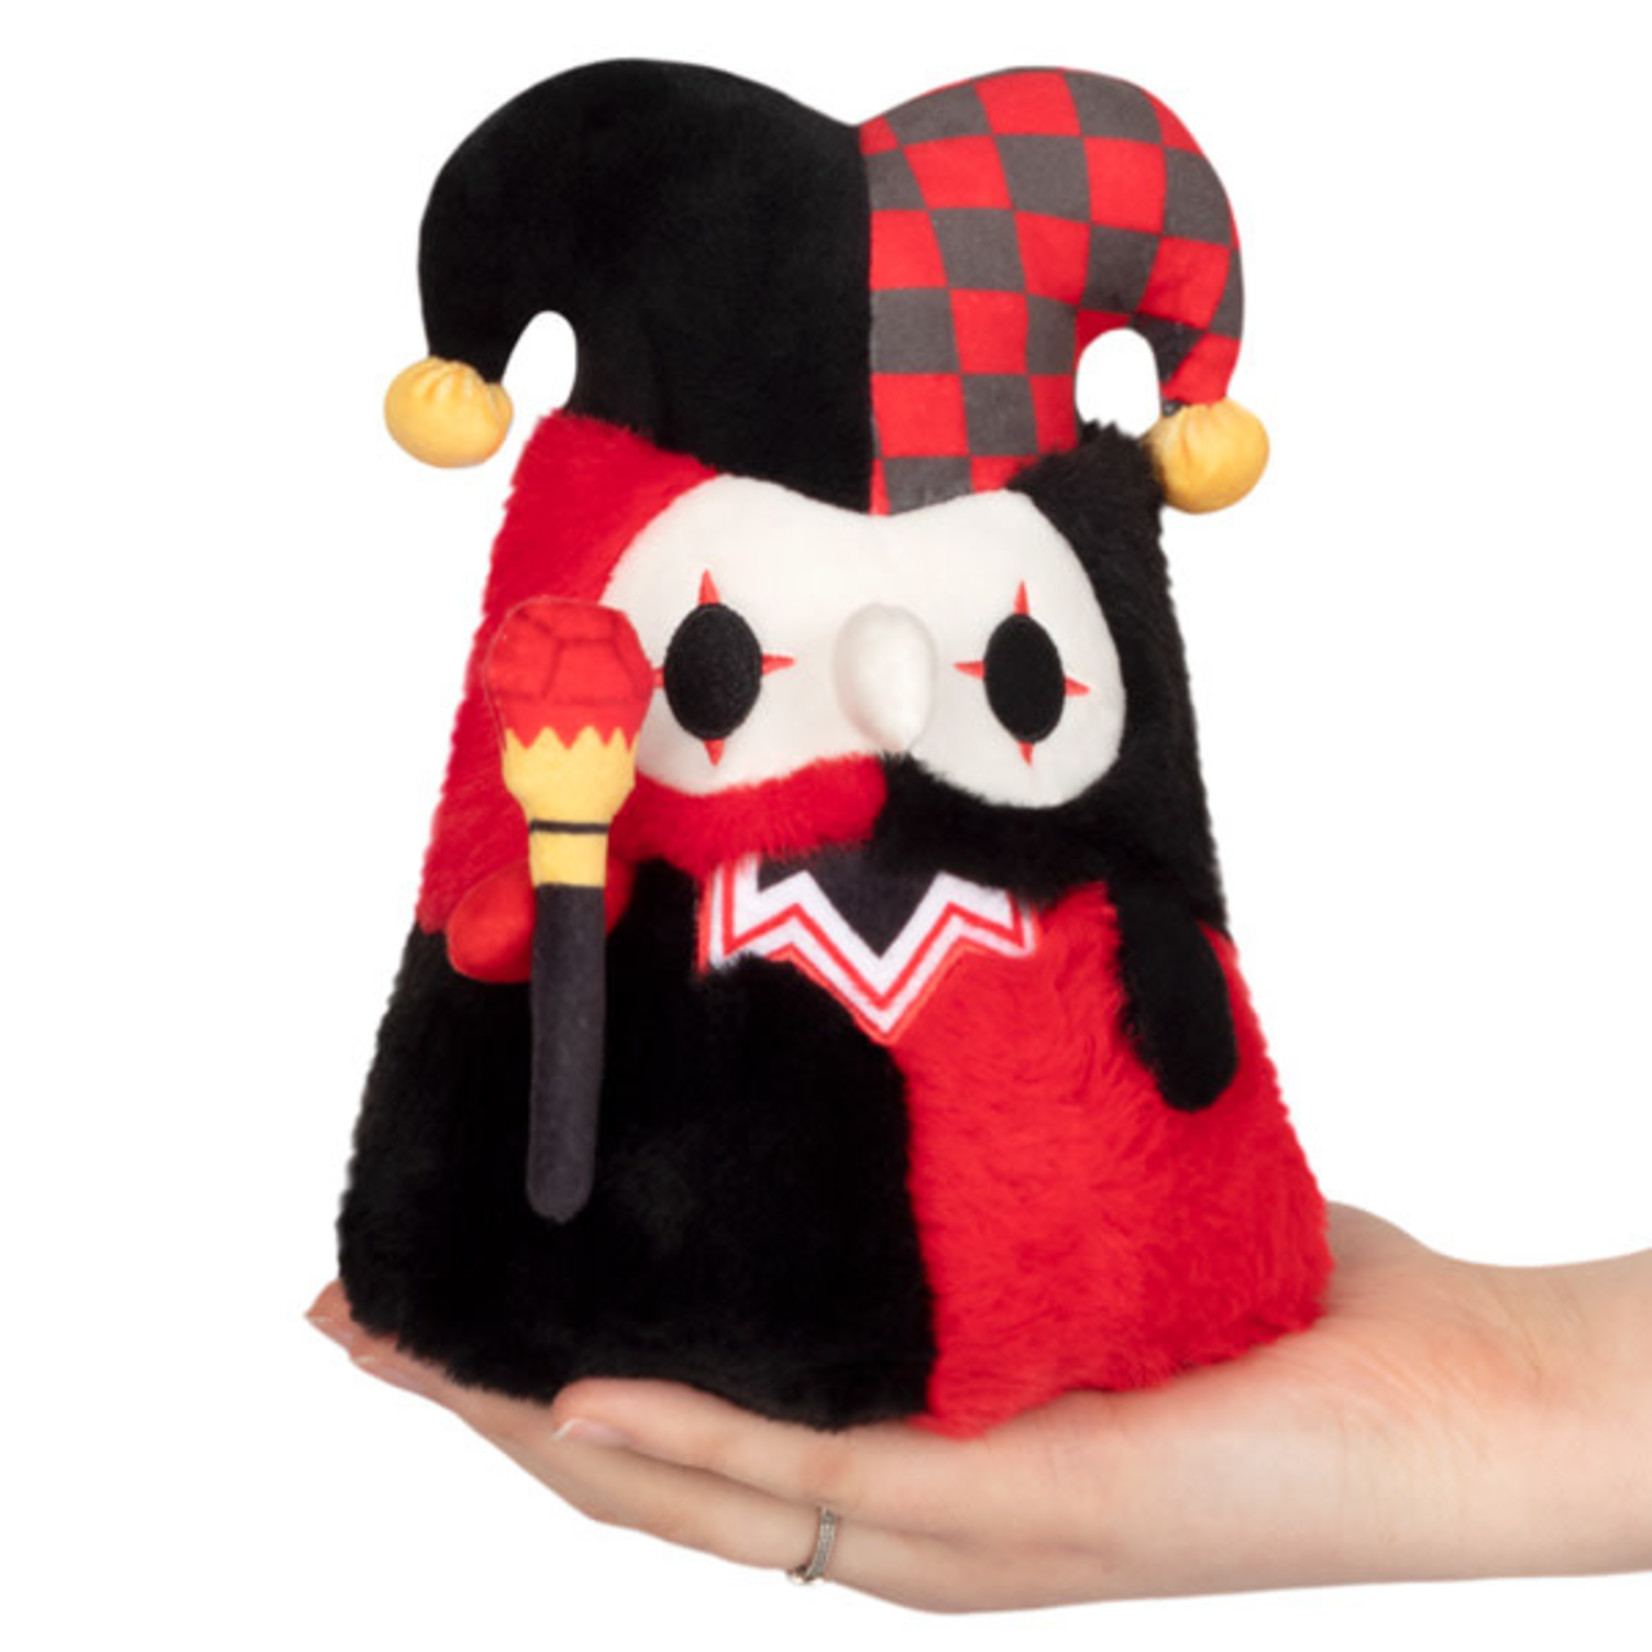 Squishable Alter Ego Jester Plague Doctor Squishable